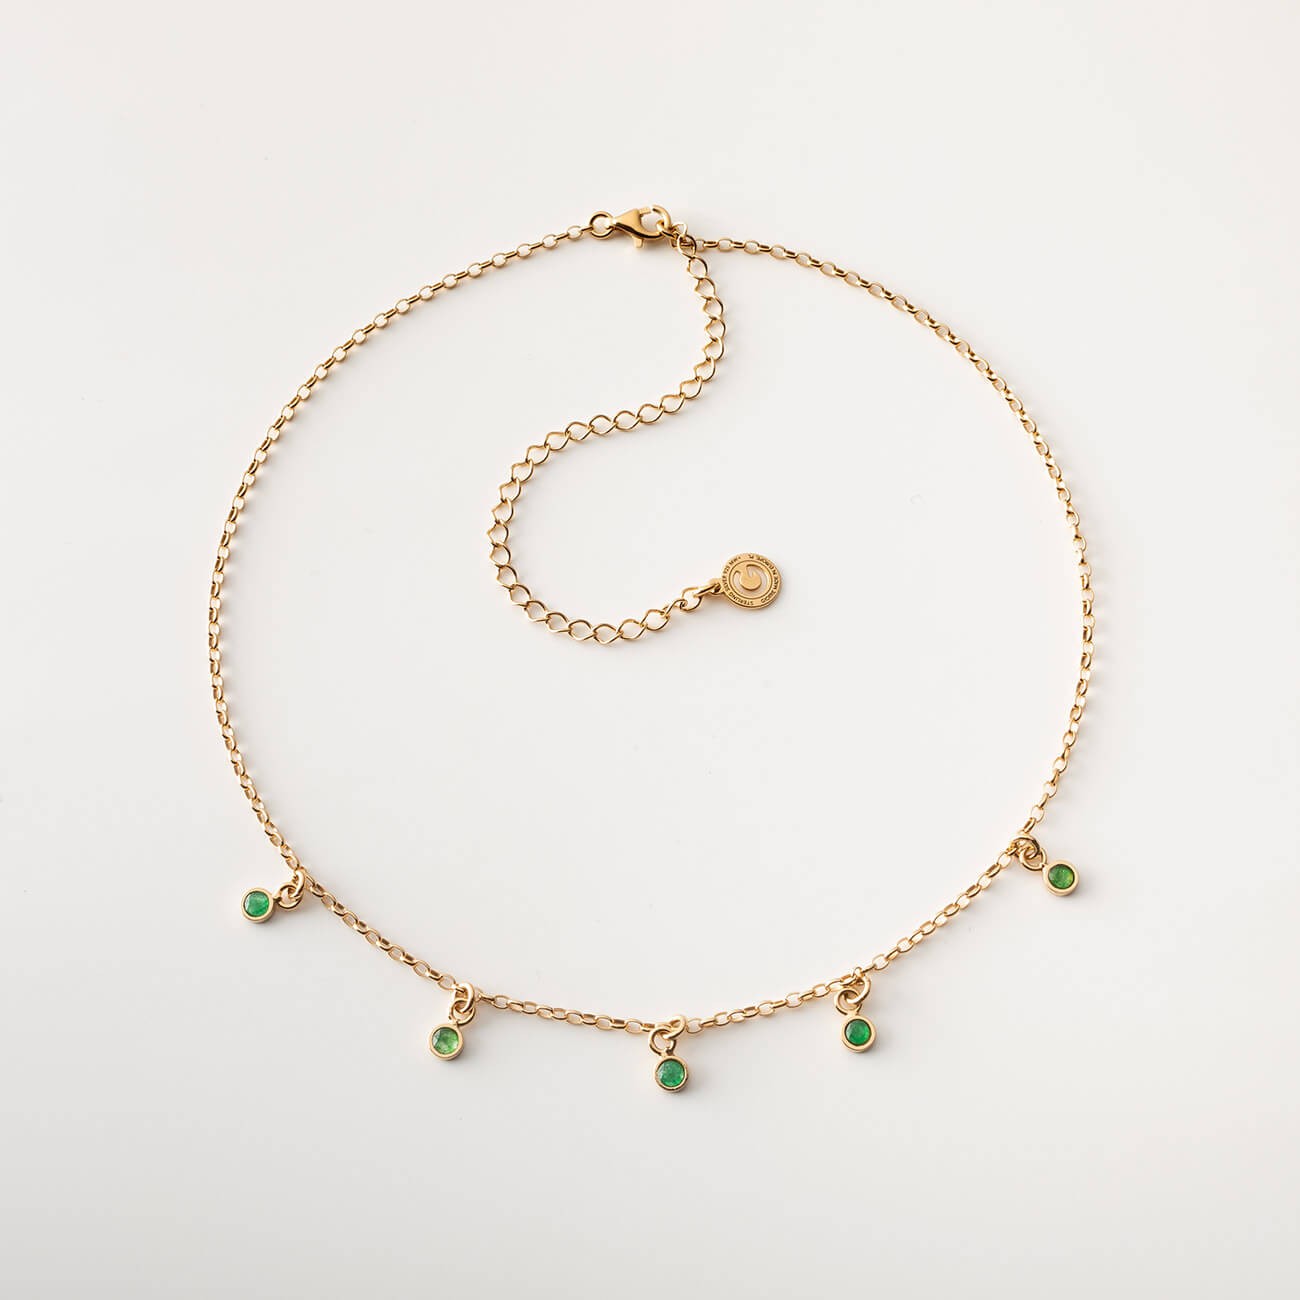 Necklace with colored stones